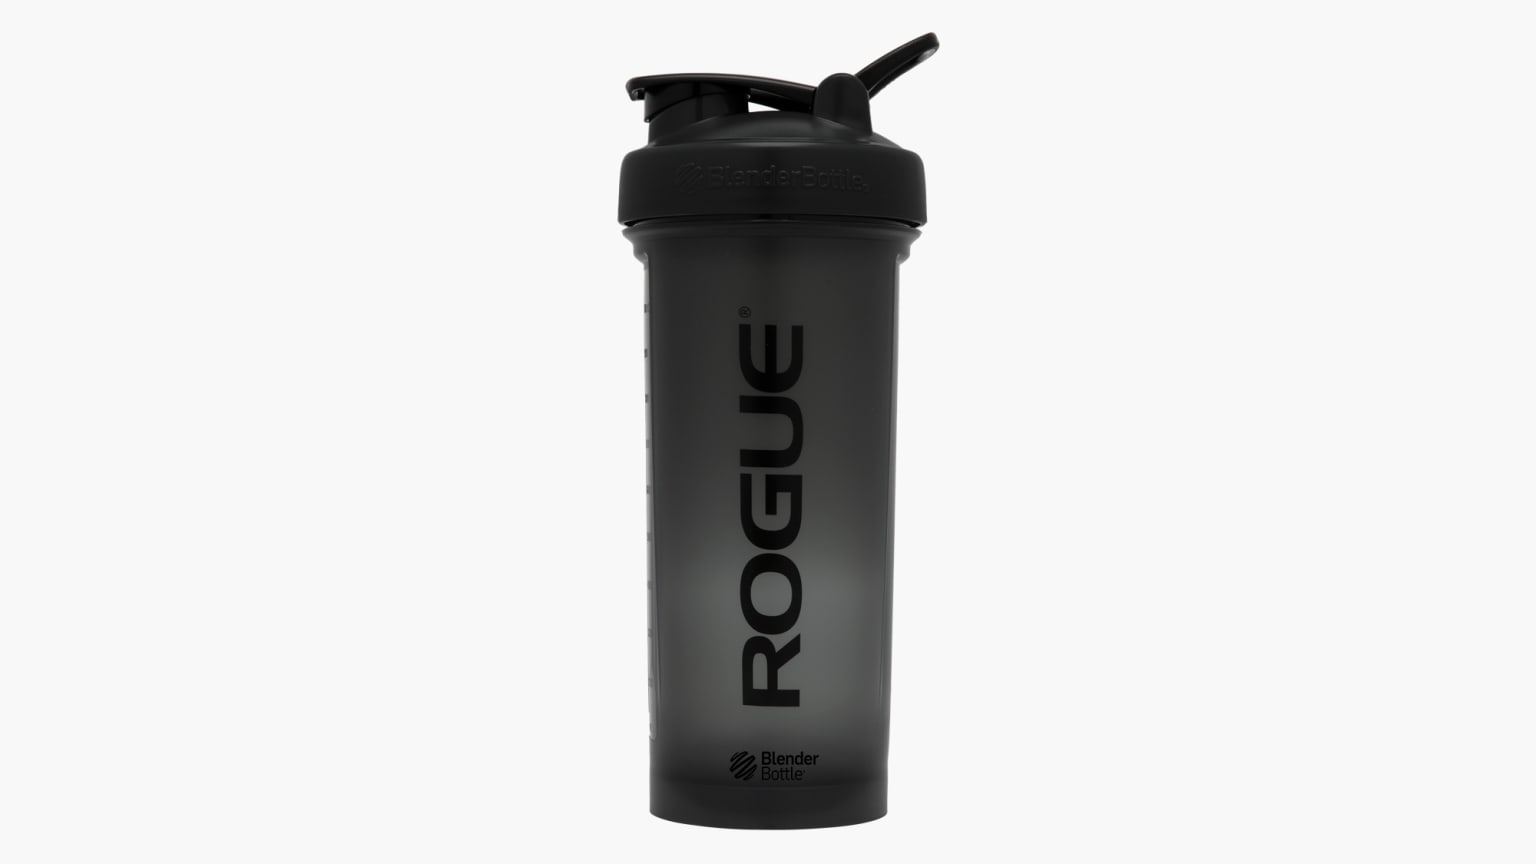 https://assets.roguefitness.com/f_auto,q_auto,c_limit,w_1536,b_rgb:f8f8f8/catalog/Gear%20and%20Accessories/Accessories/Shakers%20and%20Bottles/BB0027/BB0044-New-Version/BB0044-H_plj9uv.png